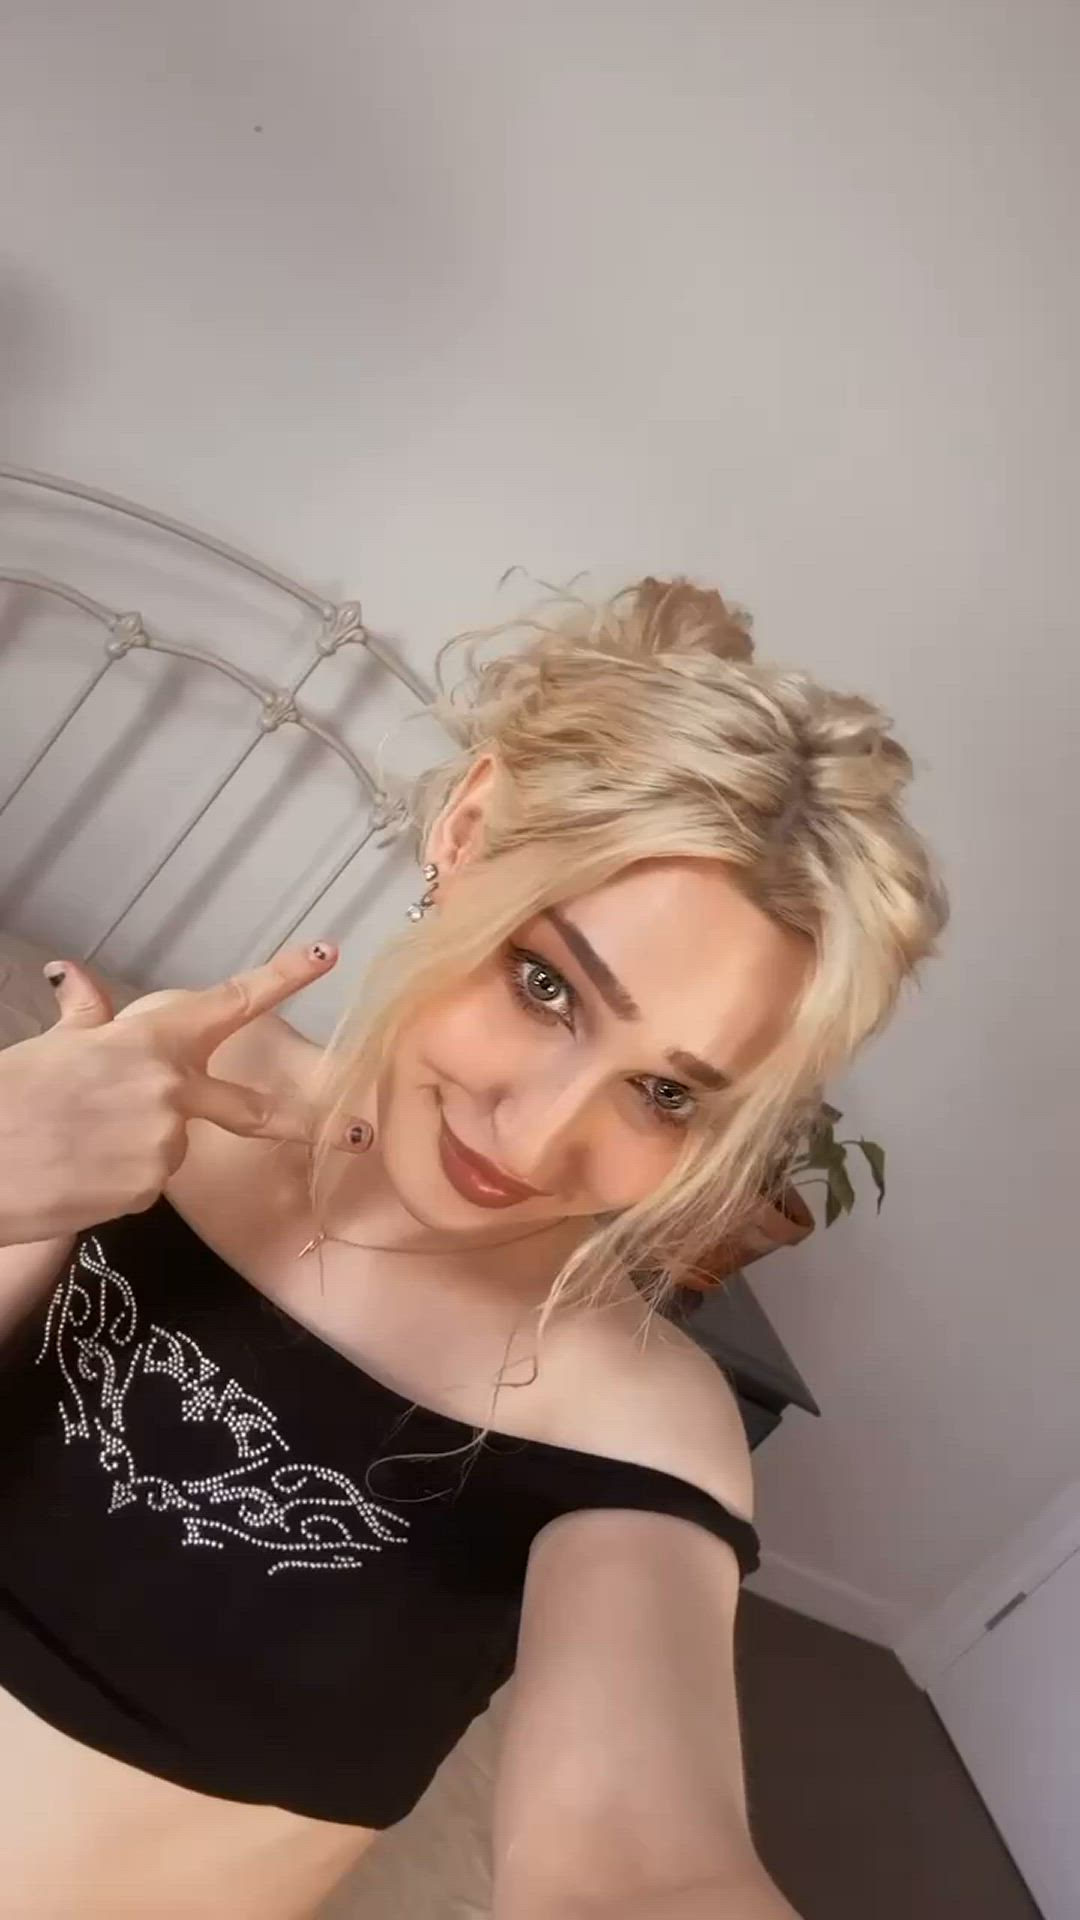 Amateur porn video with onlyfans model stormyyraets <strong>@stormyraets</strong>